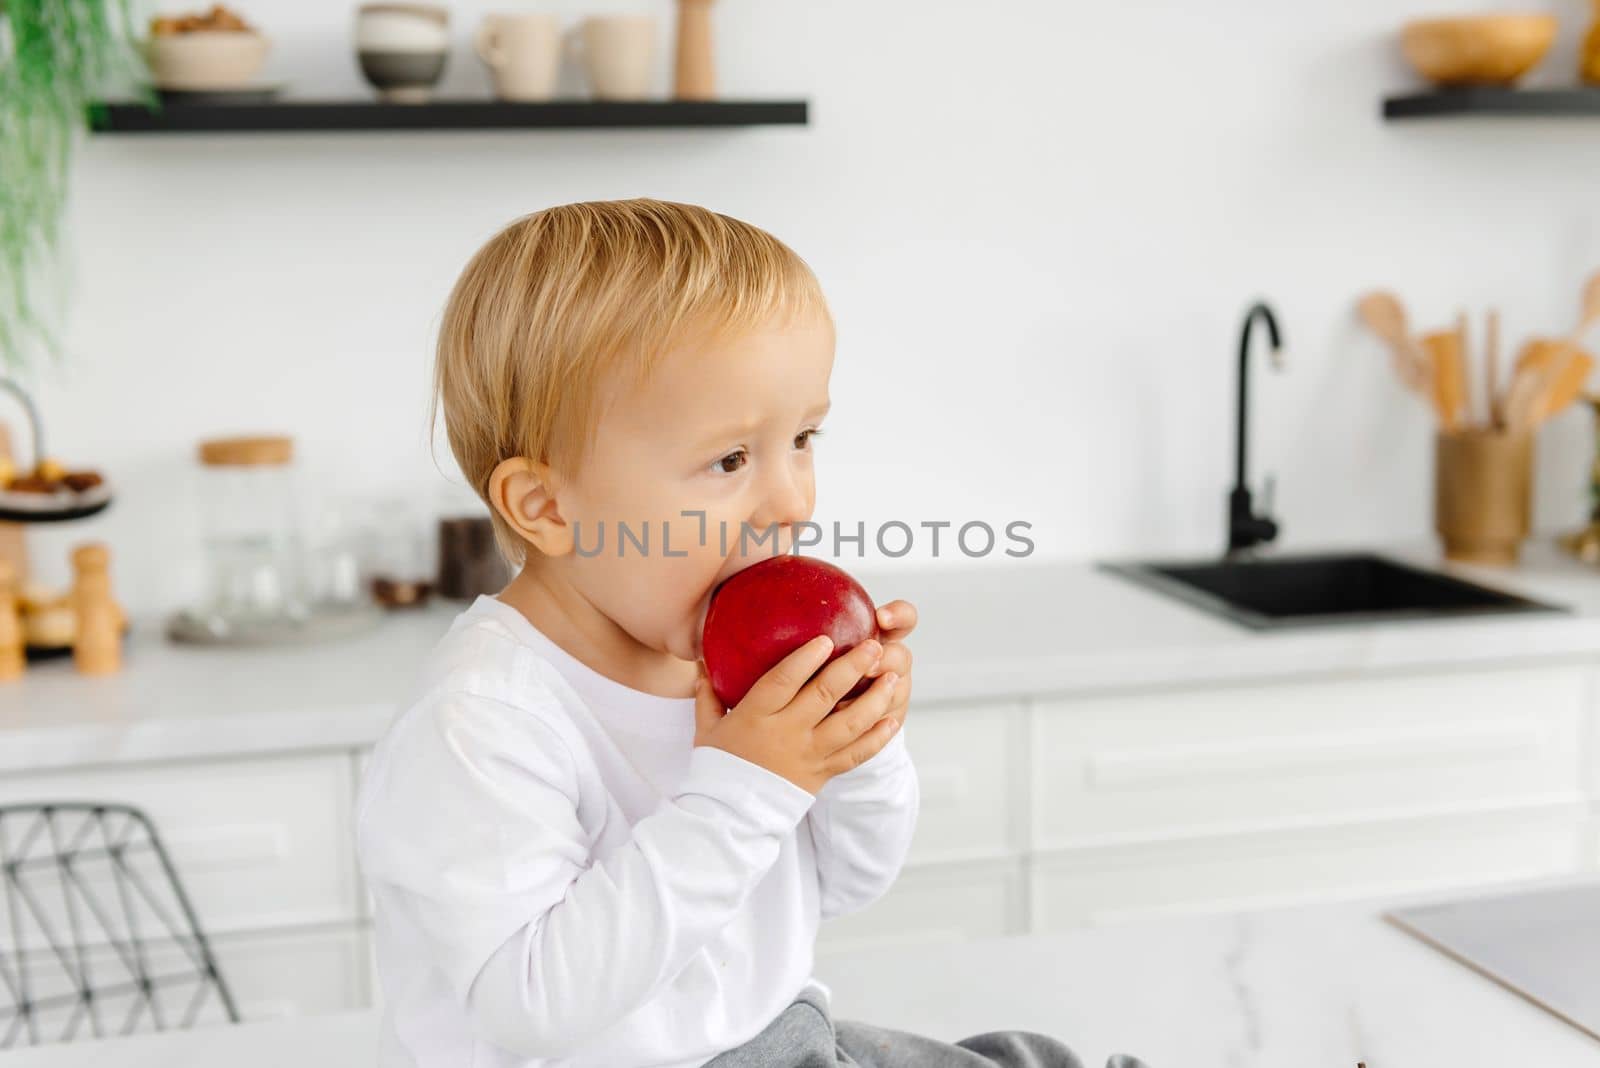 The child eats an apple for breakfast sitting in the kitchen. Healthy eating for the whole family by gulyaevstudio